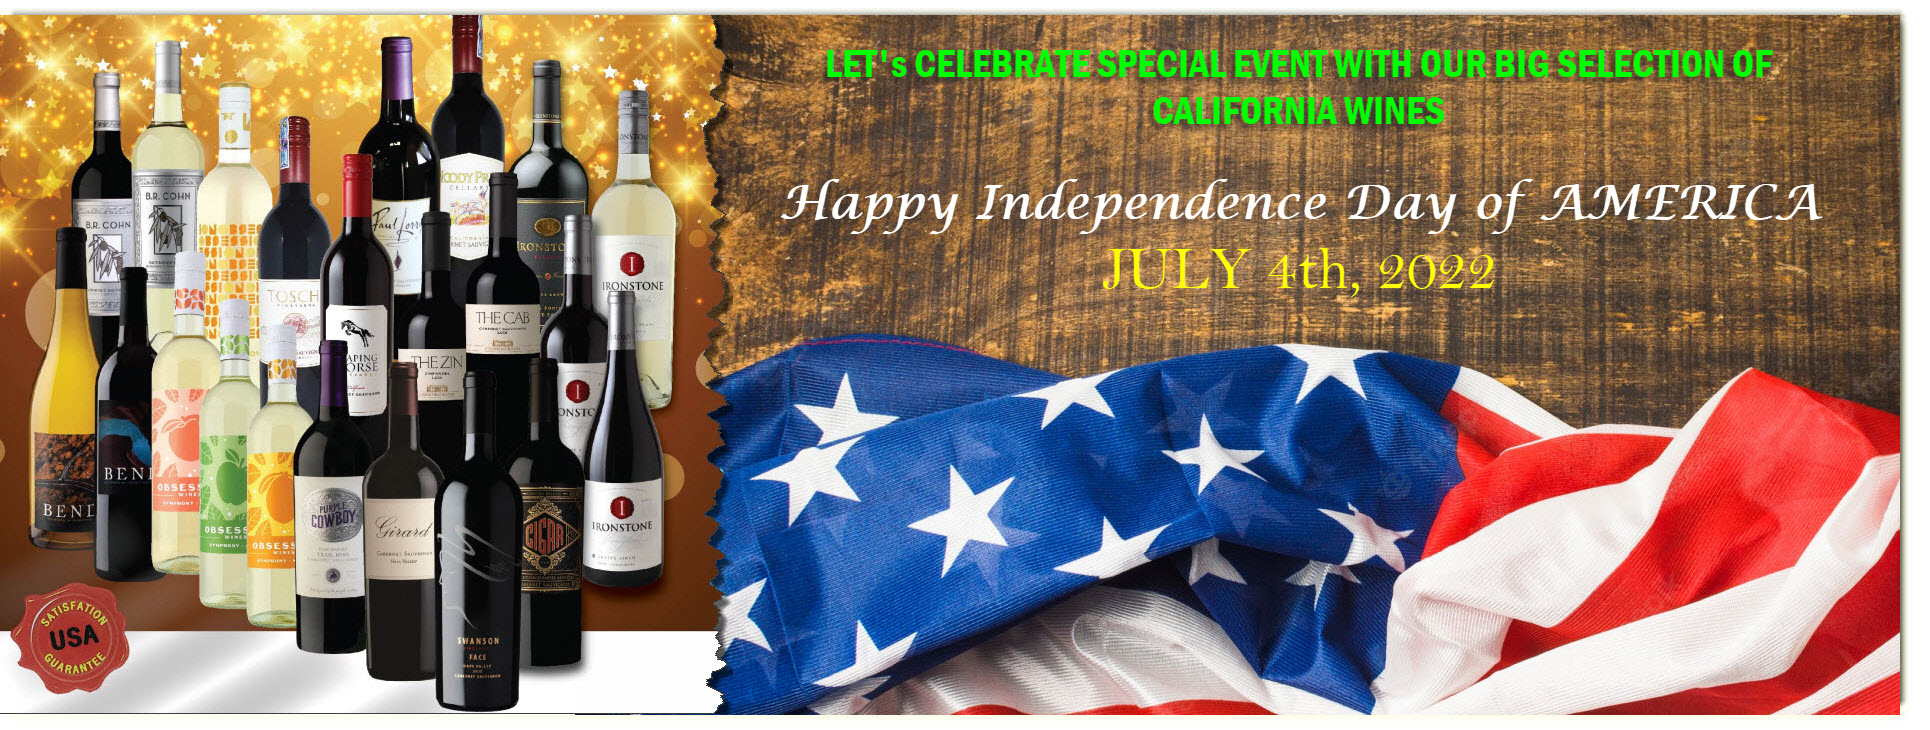 Casawines _ July 4th 2022